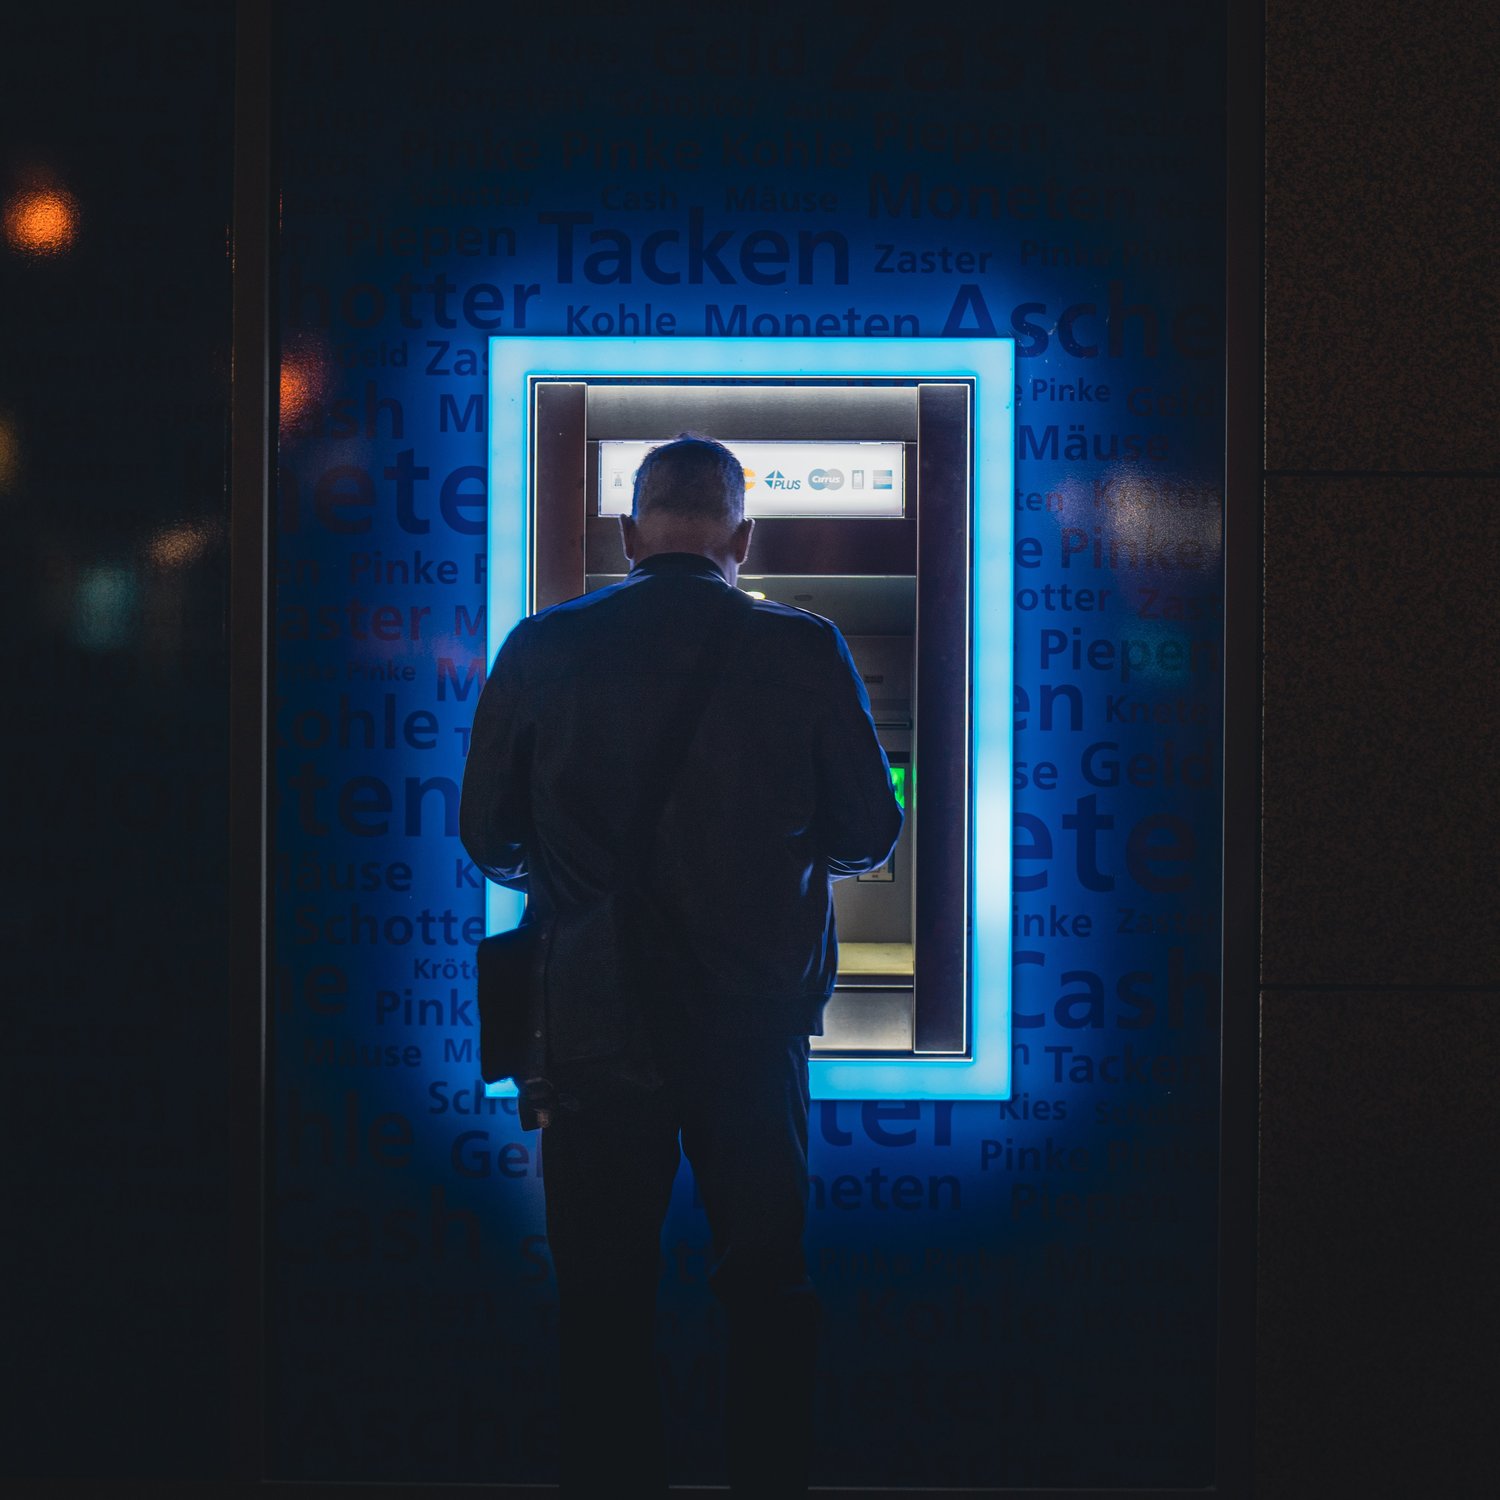 Police urge anyone using an ATM at night to be aware of their surroundings.